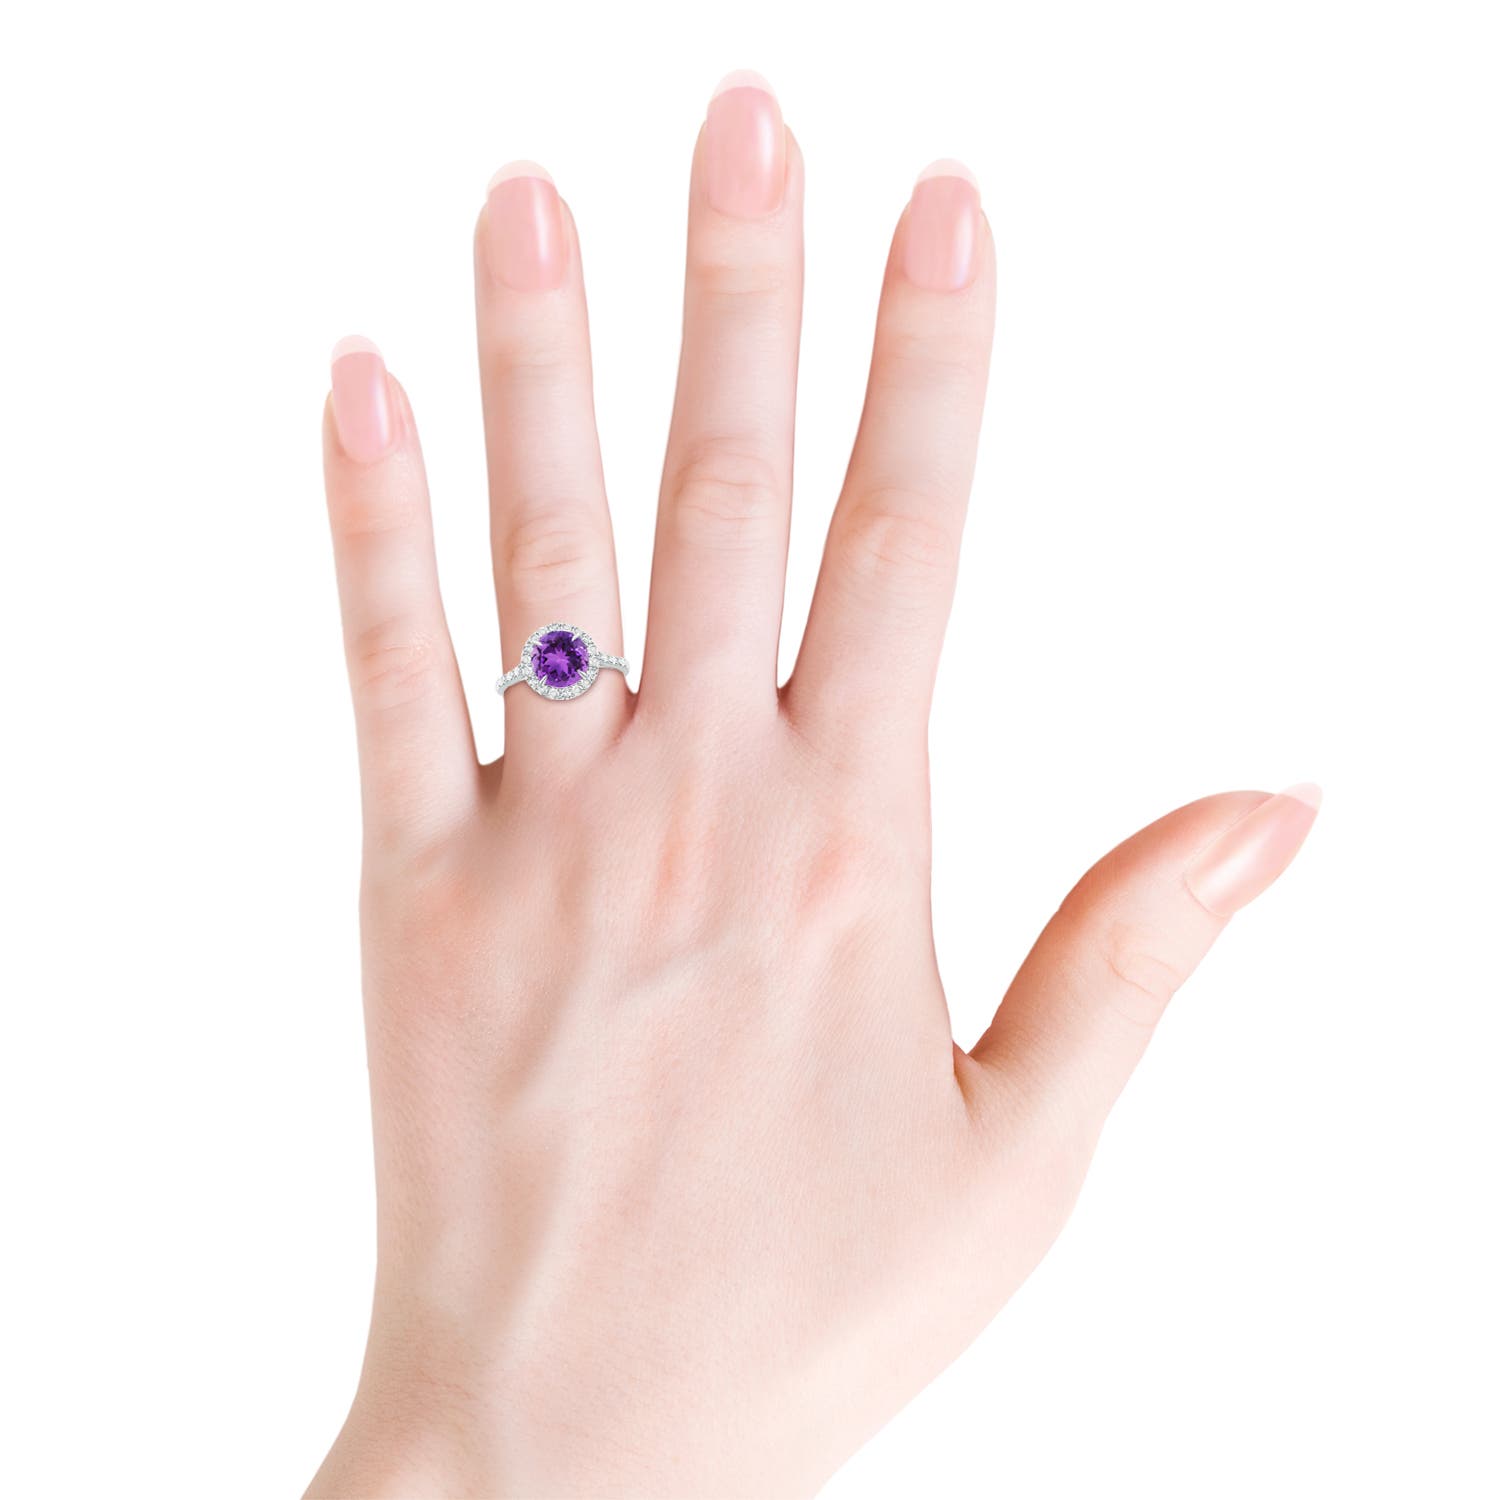 AAA - Amethyst / 1.82 CT / 14 KT White Gold